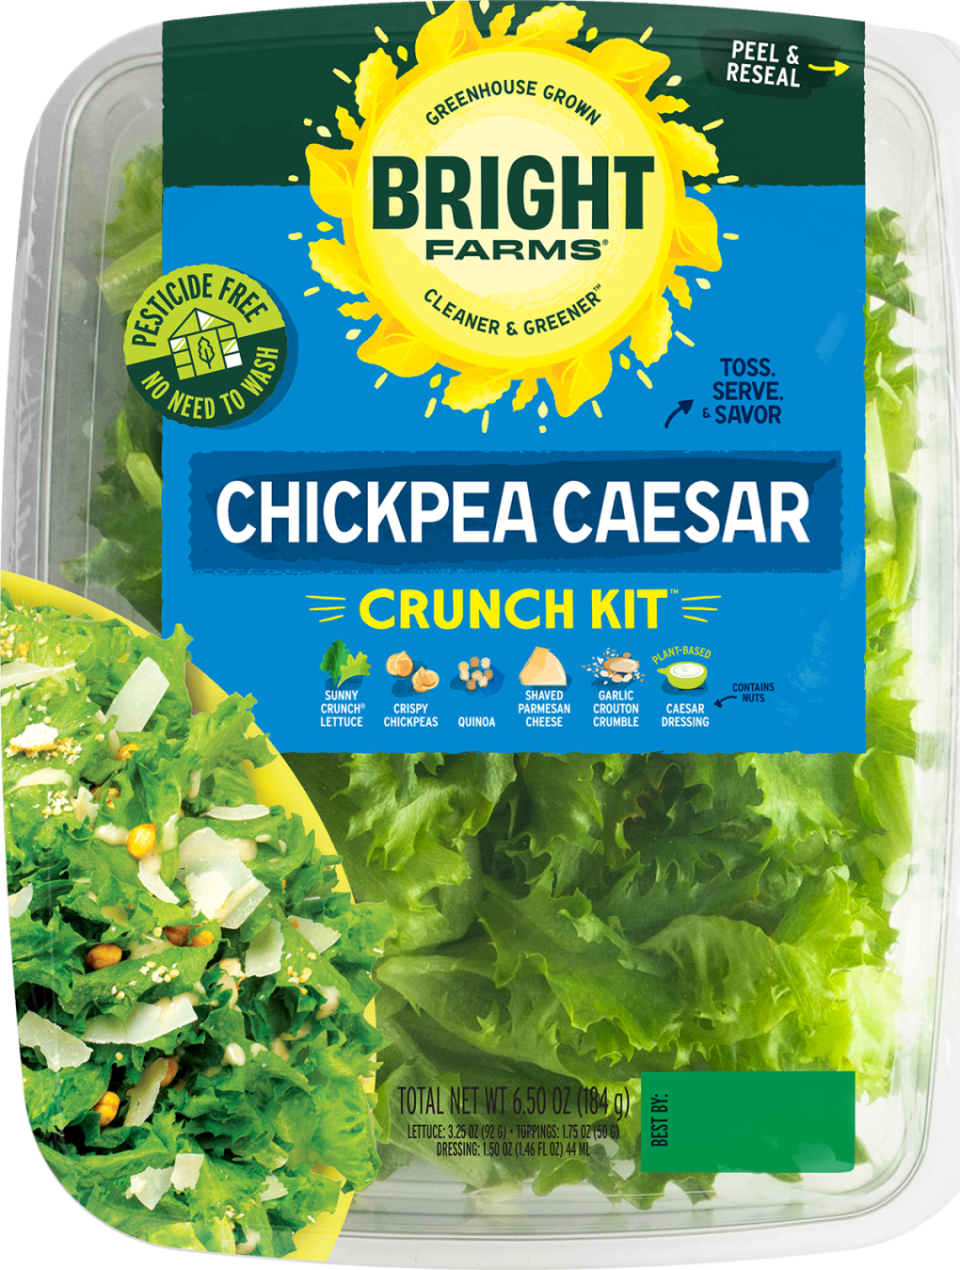 Salad and spinach kits sold in 7 states recalled over listeria risk